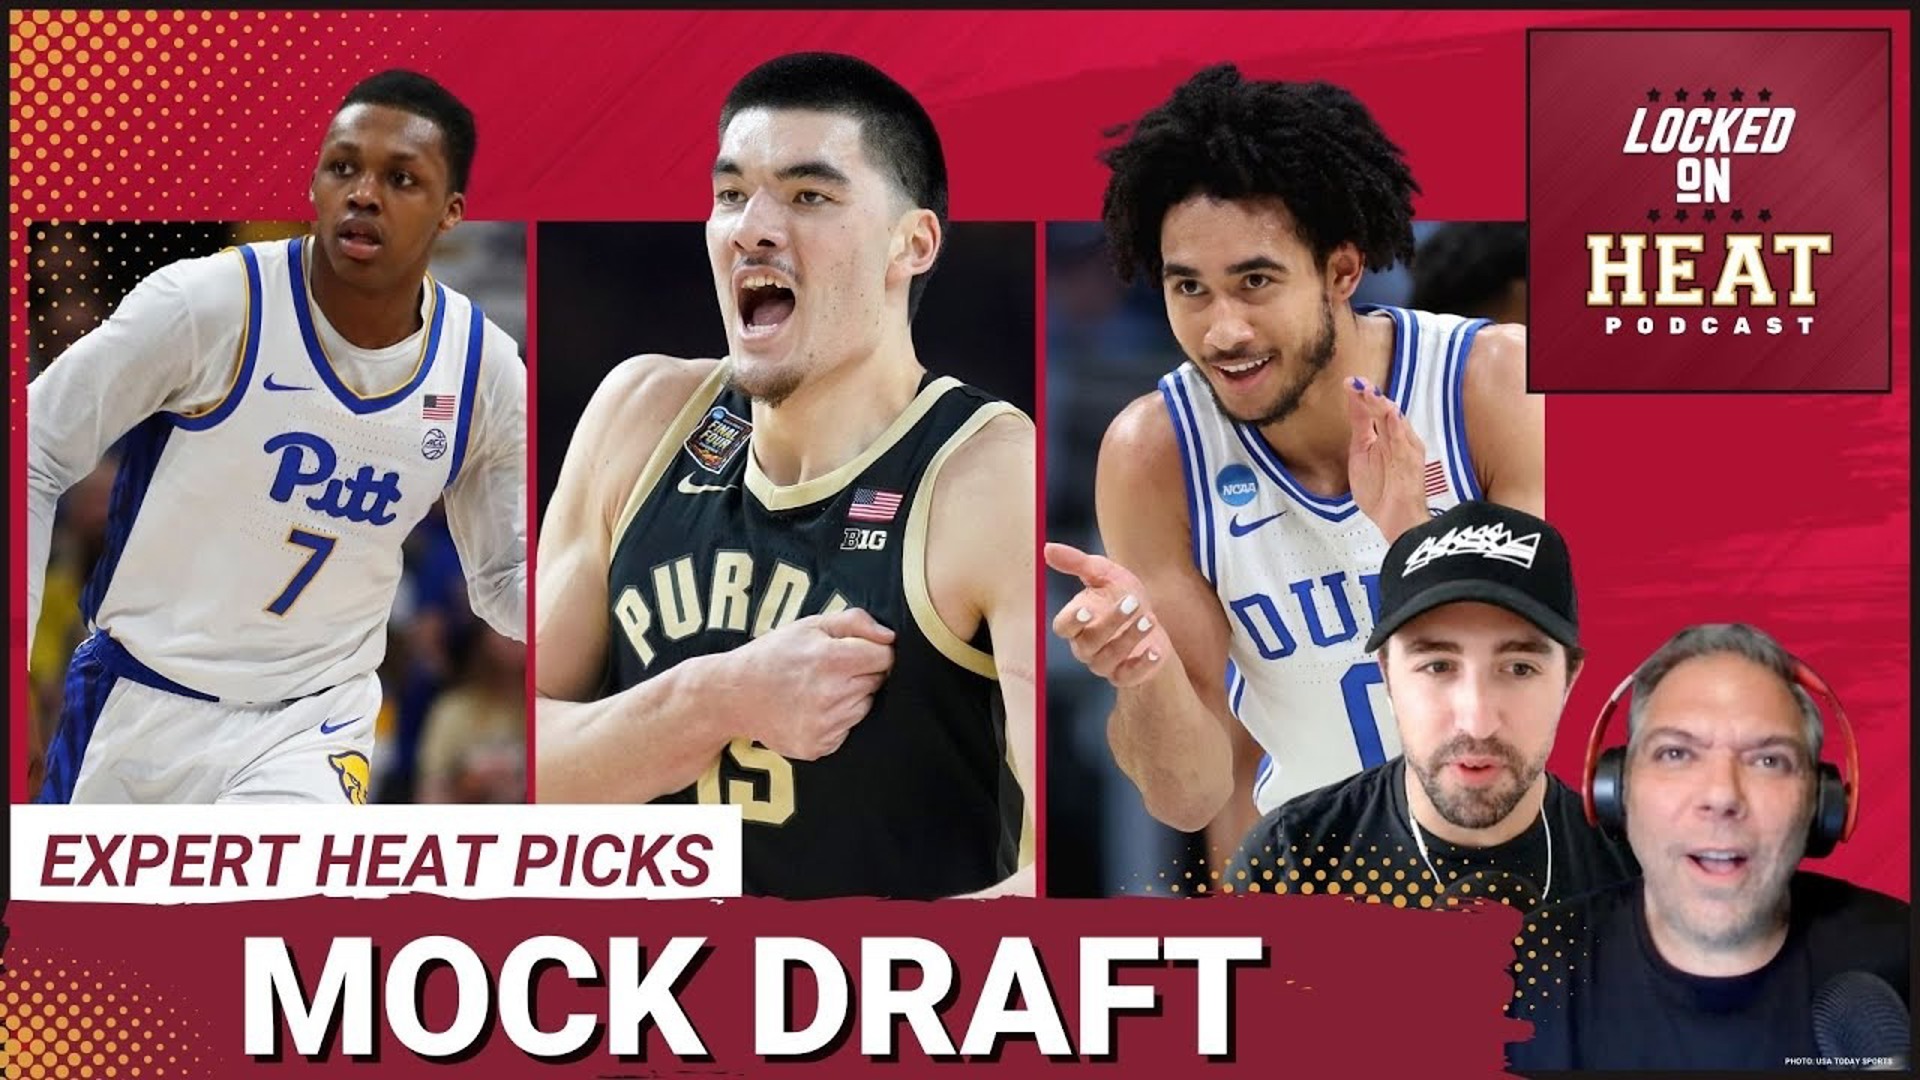 The NBA draft kicks off with the first round Wednesday night and the Miami Heat will be on the clock with the 15th pick.